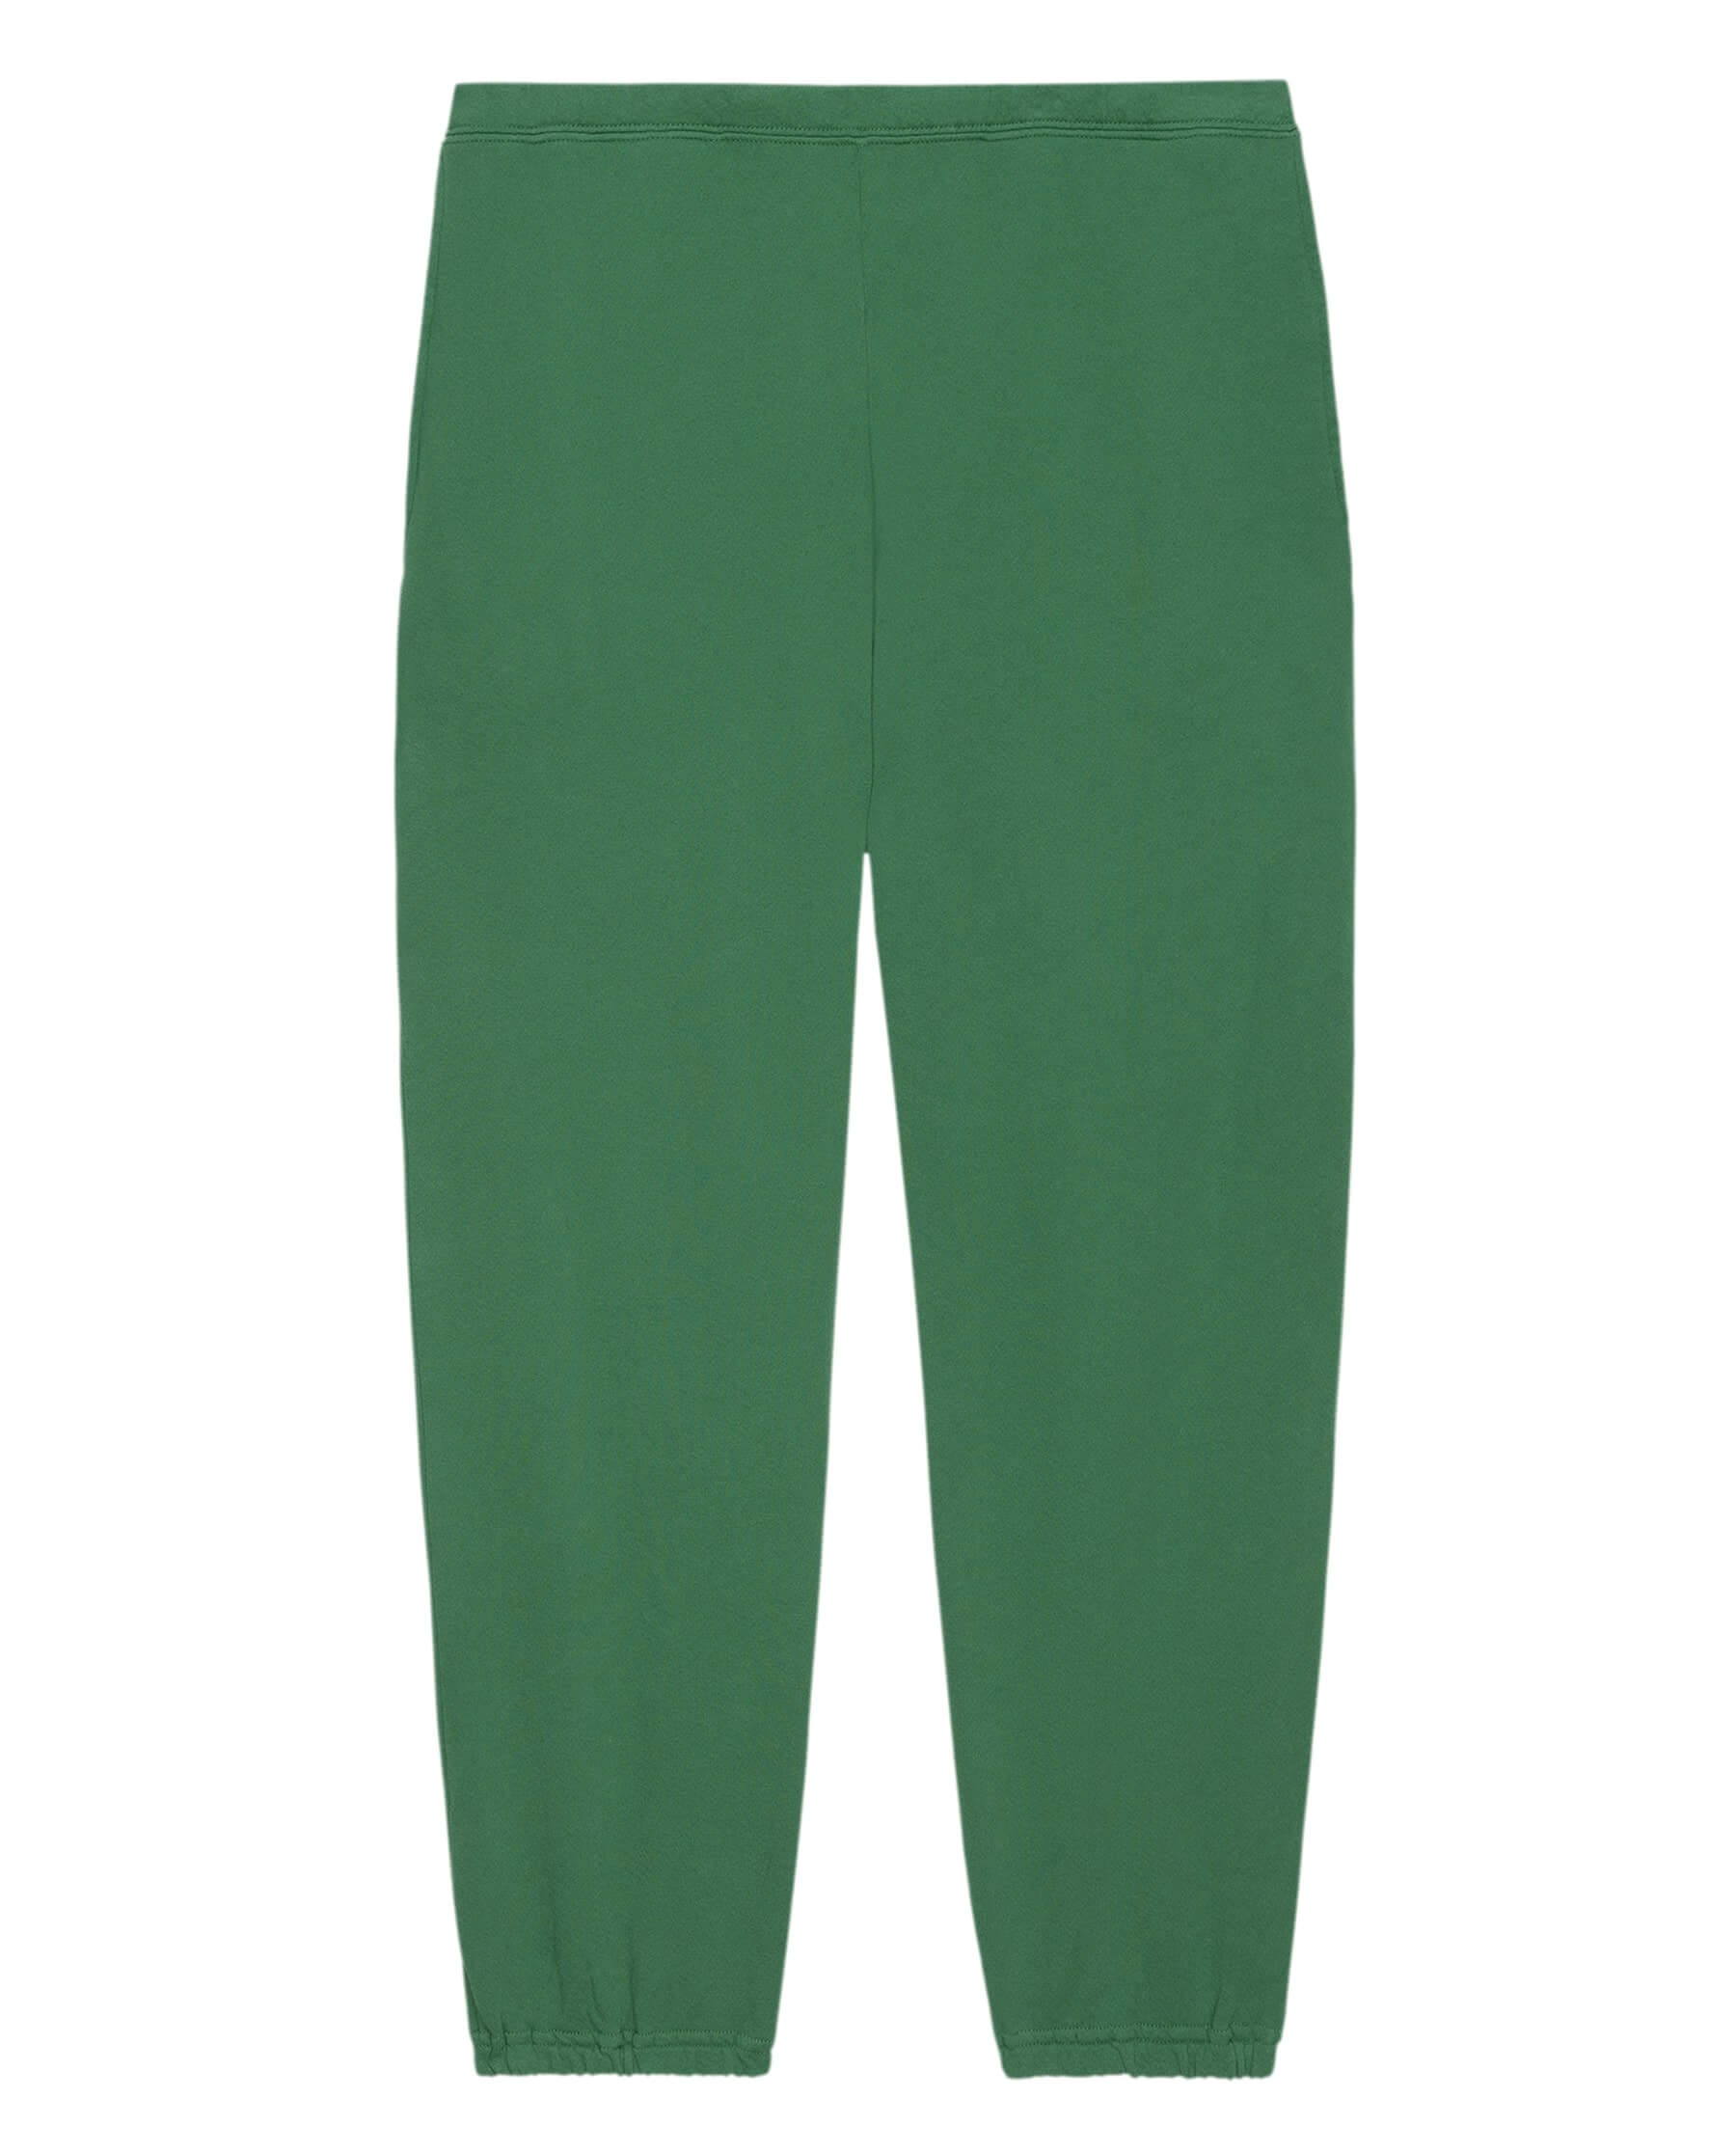 The Men's Stadium Sweatpant. Solid -- Holly Leaf SWEATPANTS THE GREAT. HOL 23 MEN